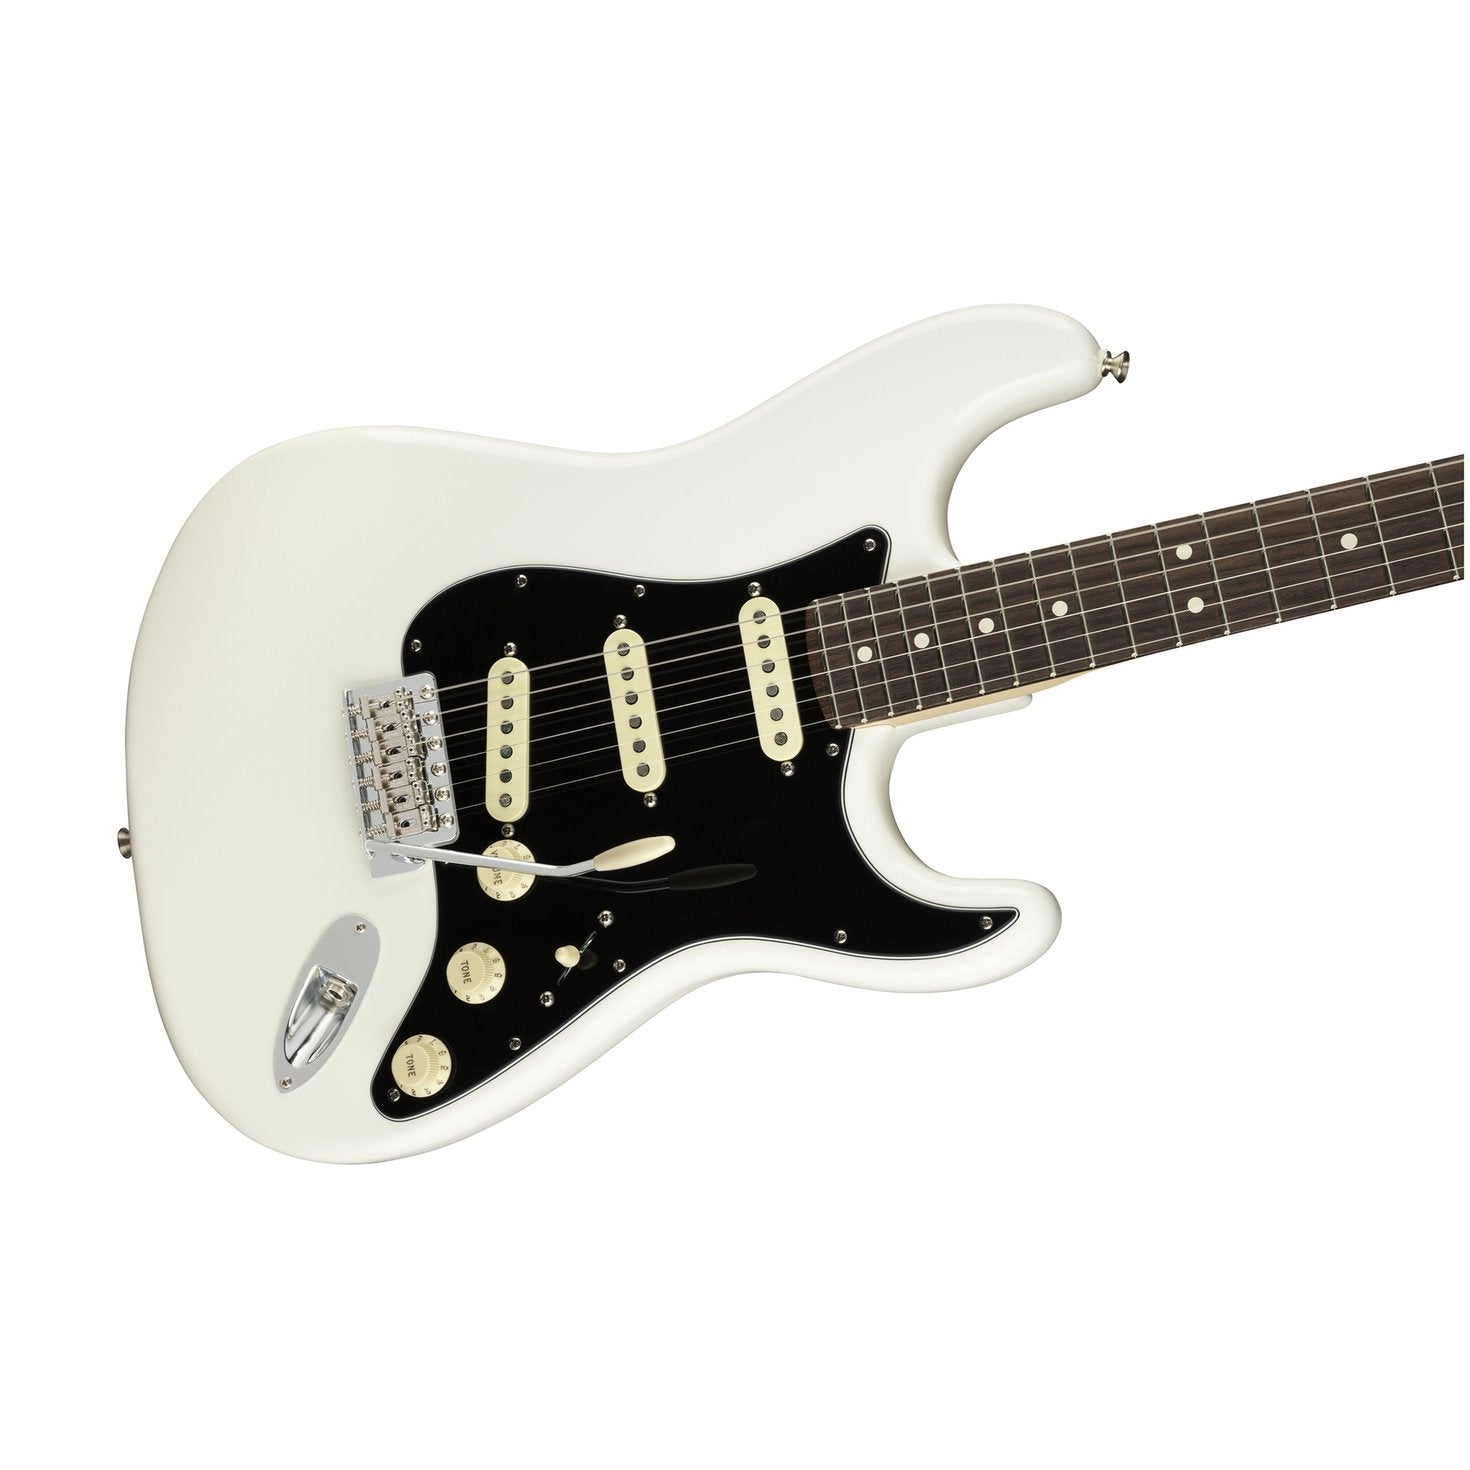 Fender American Performer Stratocaster Electric Guitar Rosewood FB, Arctic White, FENDER, ELECTRIC GUITAR, fender-electric-guitar-f03-011-4910-380, ZOSO MUSIC SDN BHD